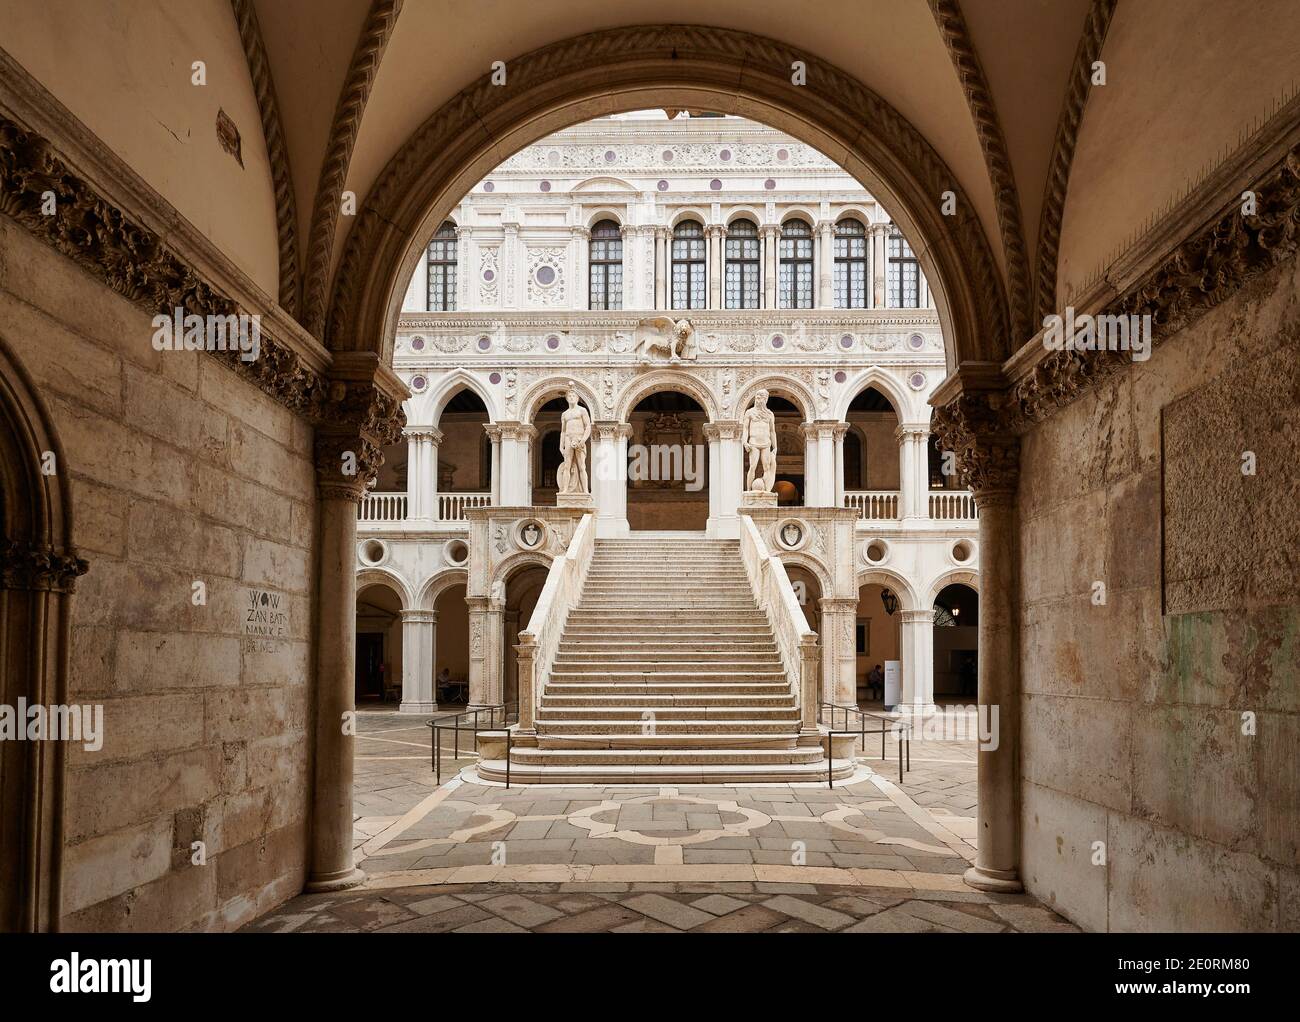 inner courtyard of Doge's Palace, Palazzo Ducale with staircase Scala dei Giganti, Venice, Veneto, Italy Stock Photo